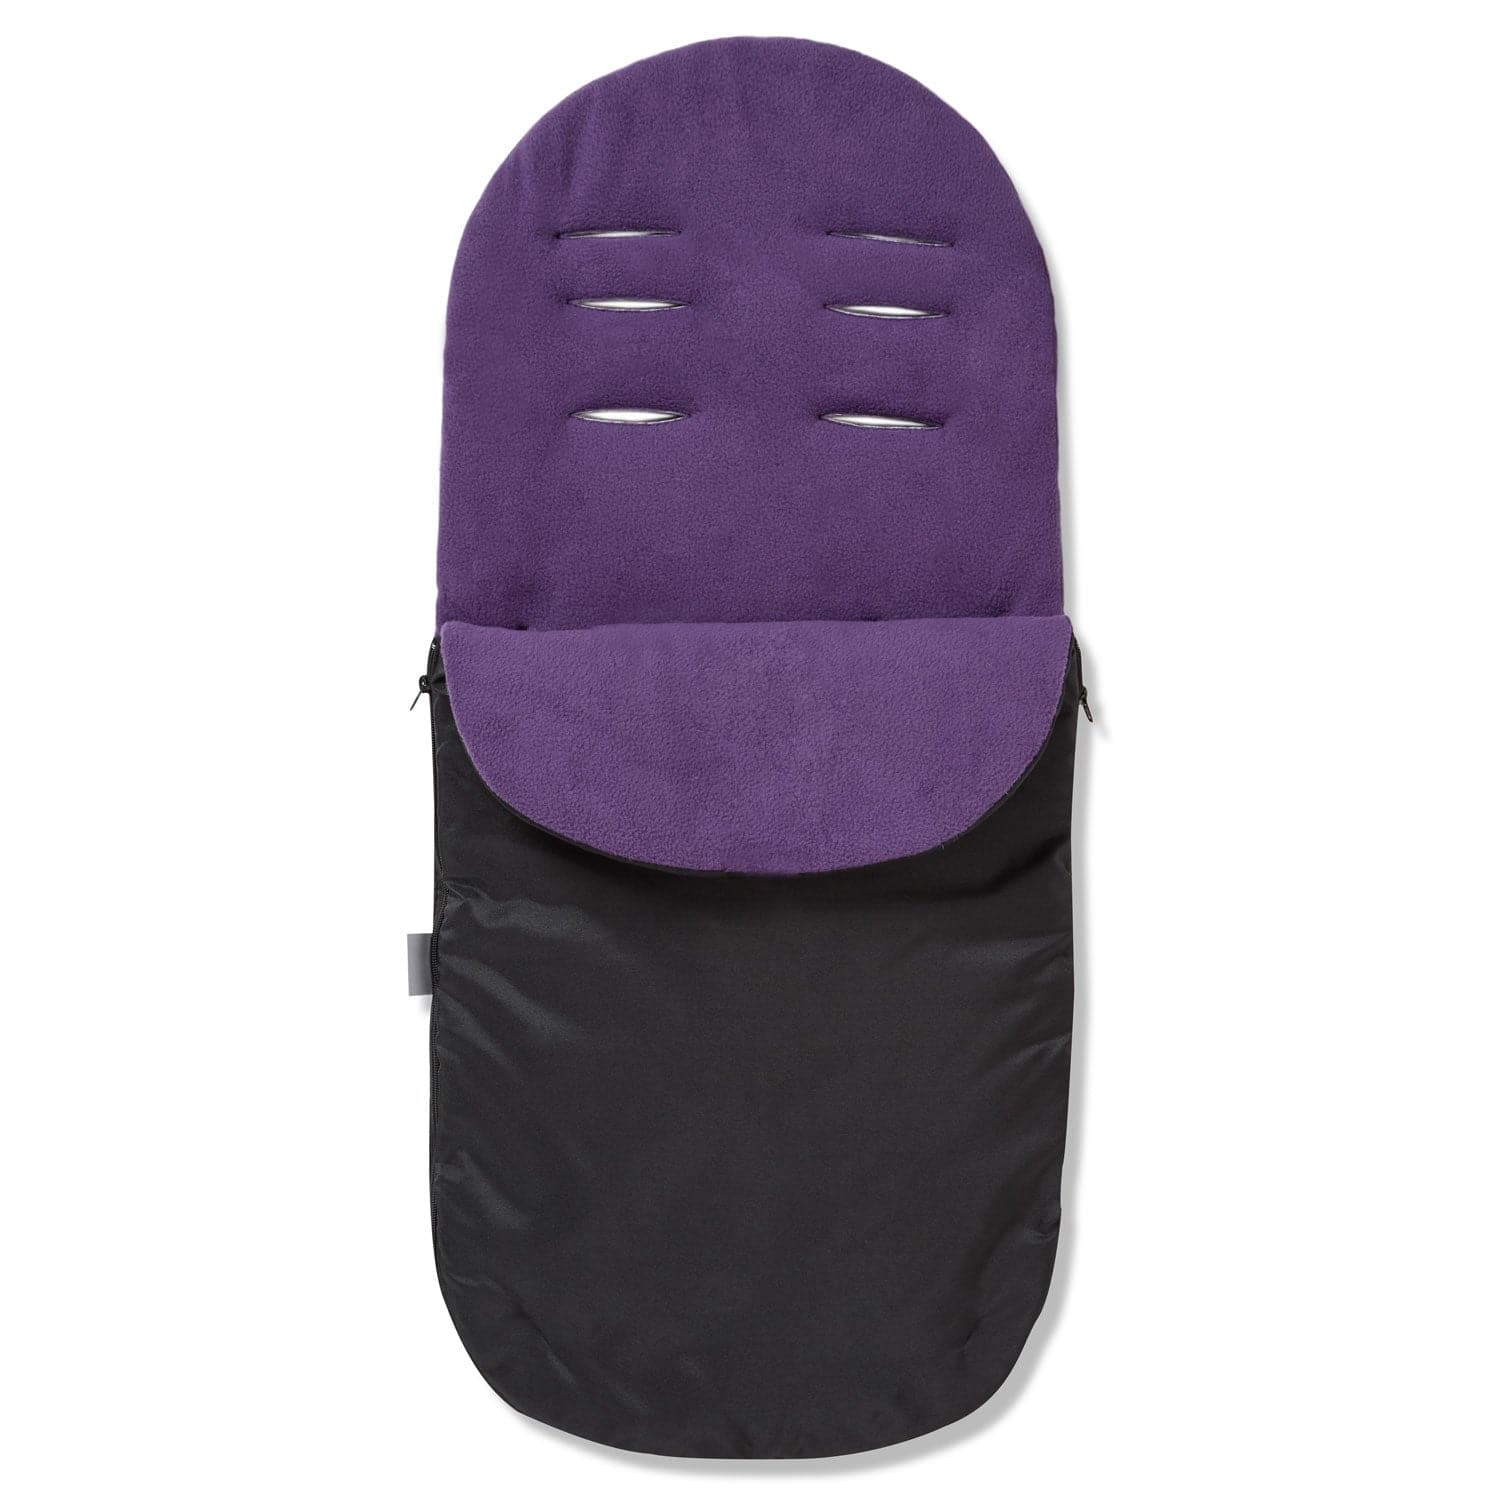 Footmuff / Cosy Toes Compatible with Recaro - Purple / Fits All Models | For Your Little One